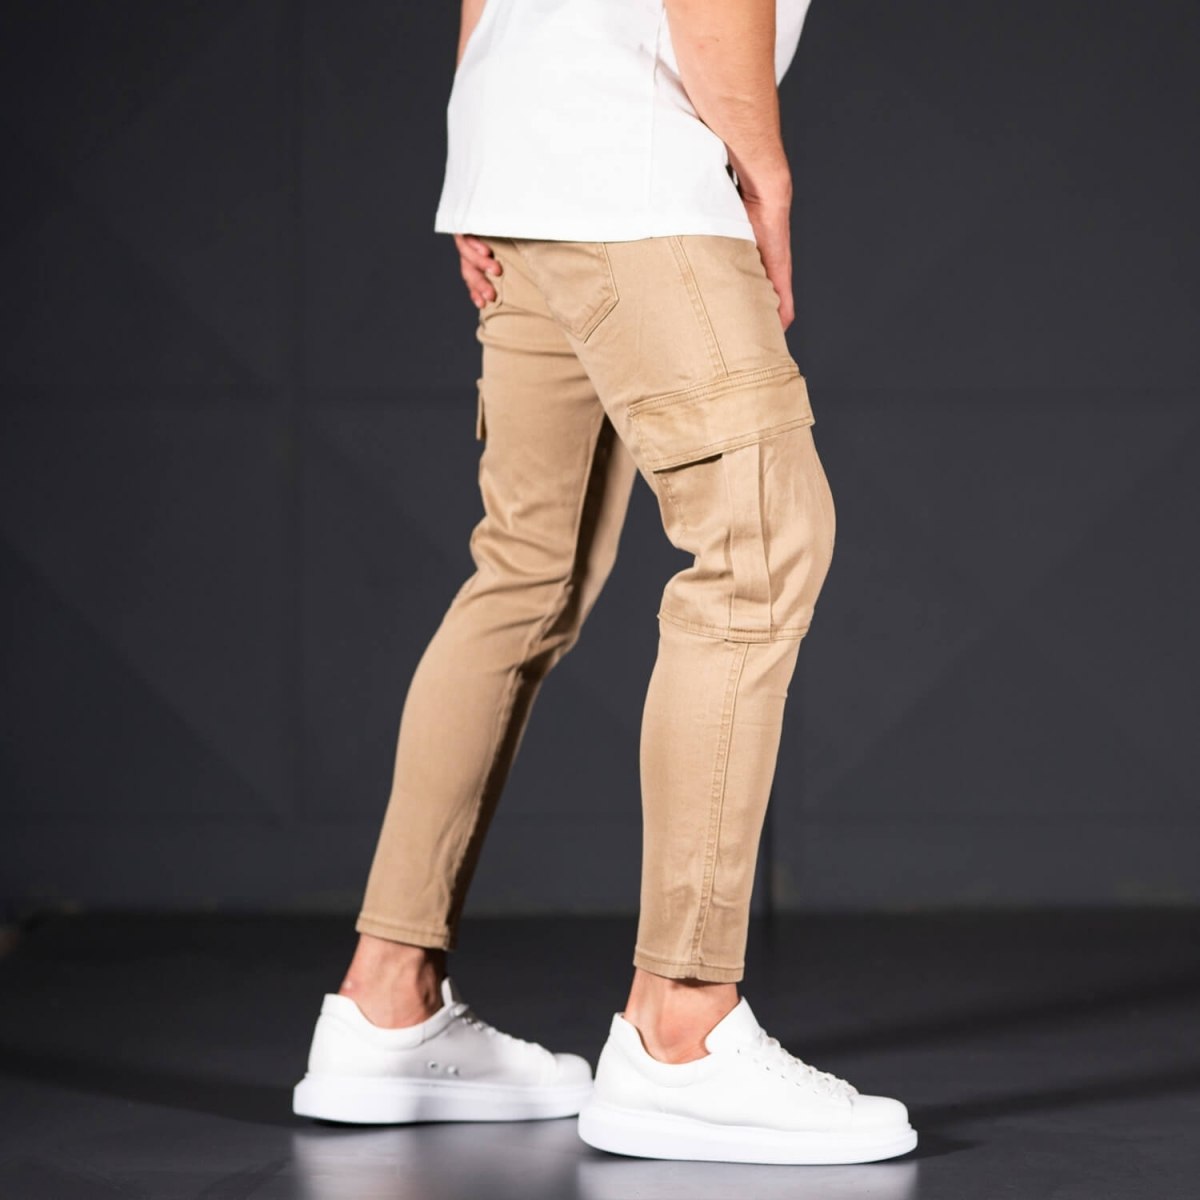 Men's Jeans with Pockets Style in Camel